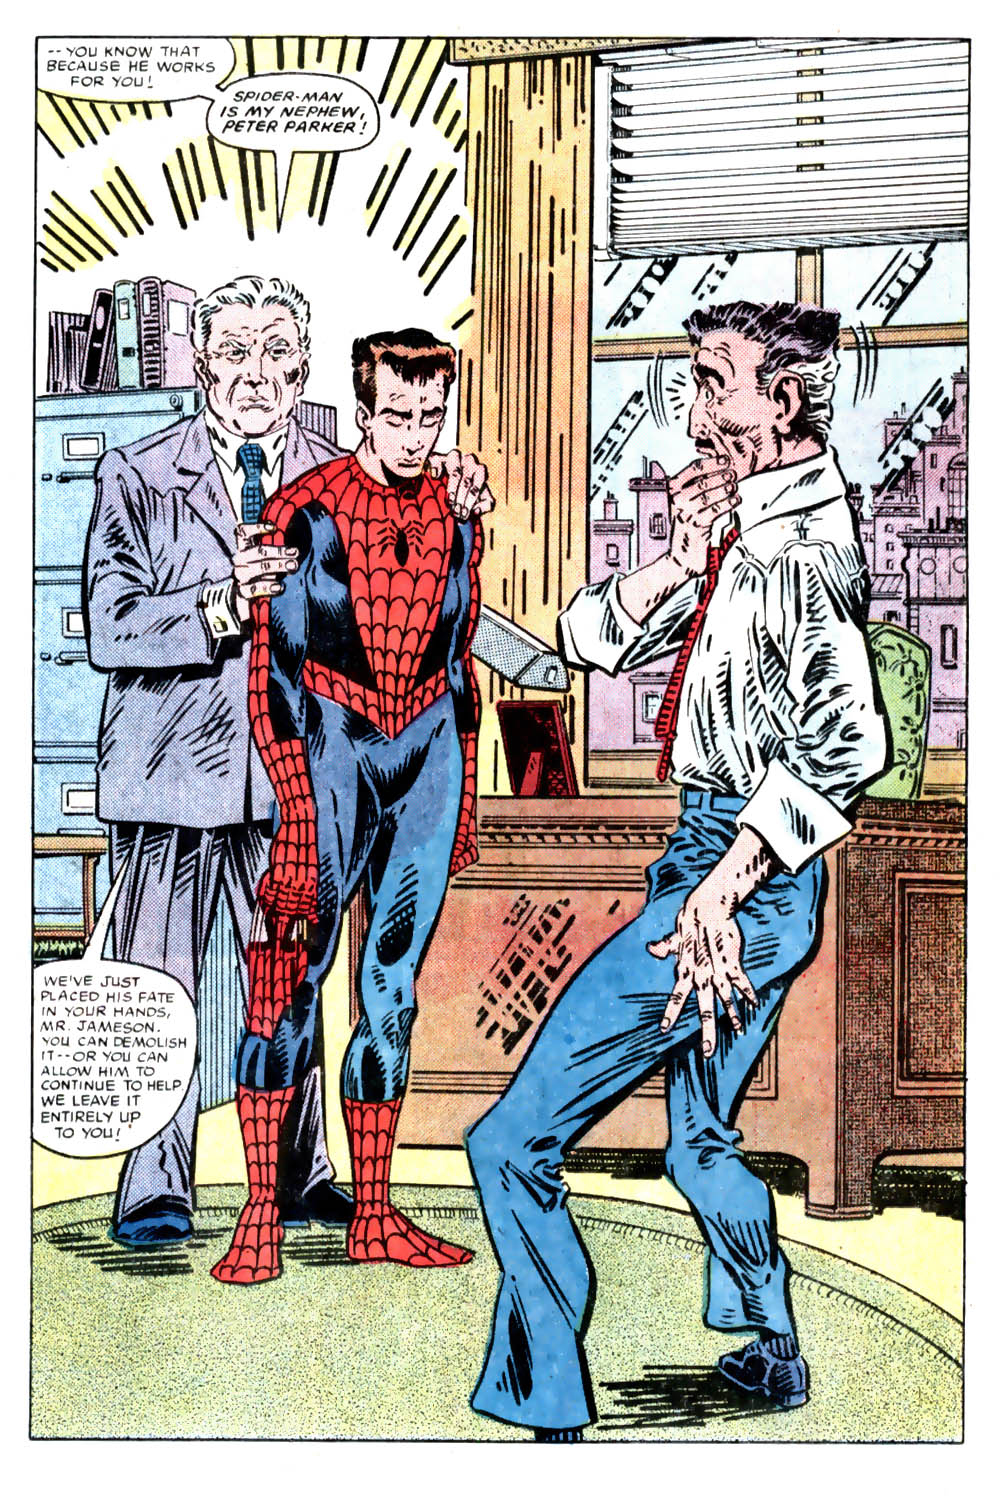 What If? (1977) issue 46 - Spiderman's uncle ben had lived - Page 18